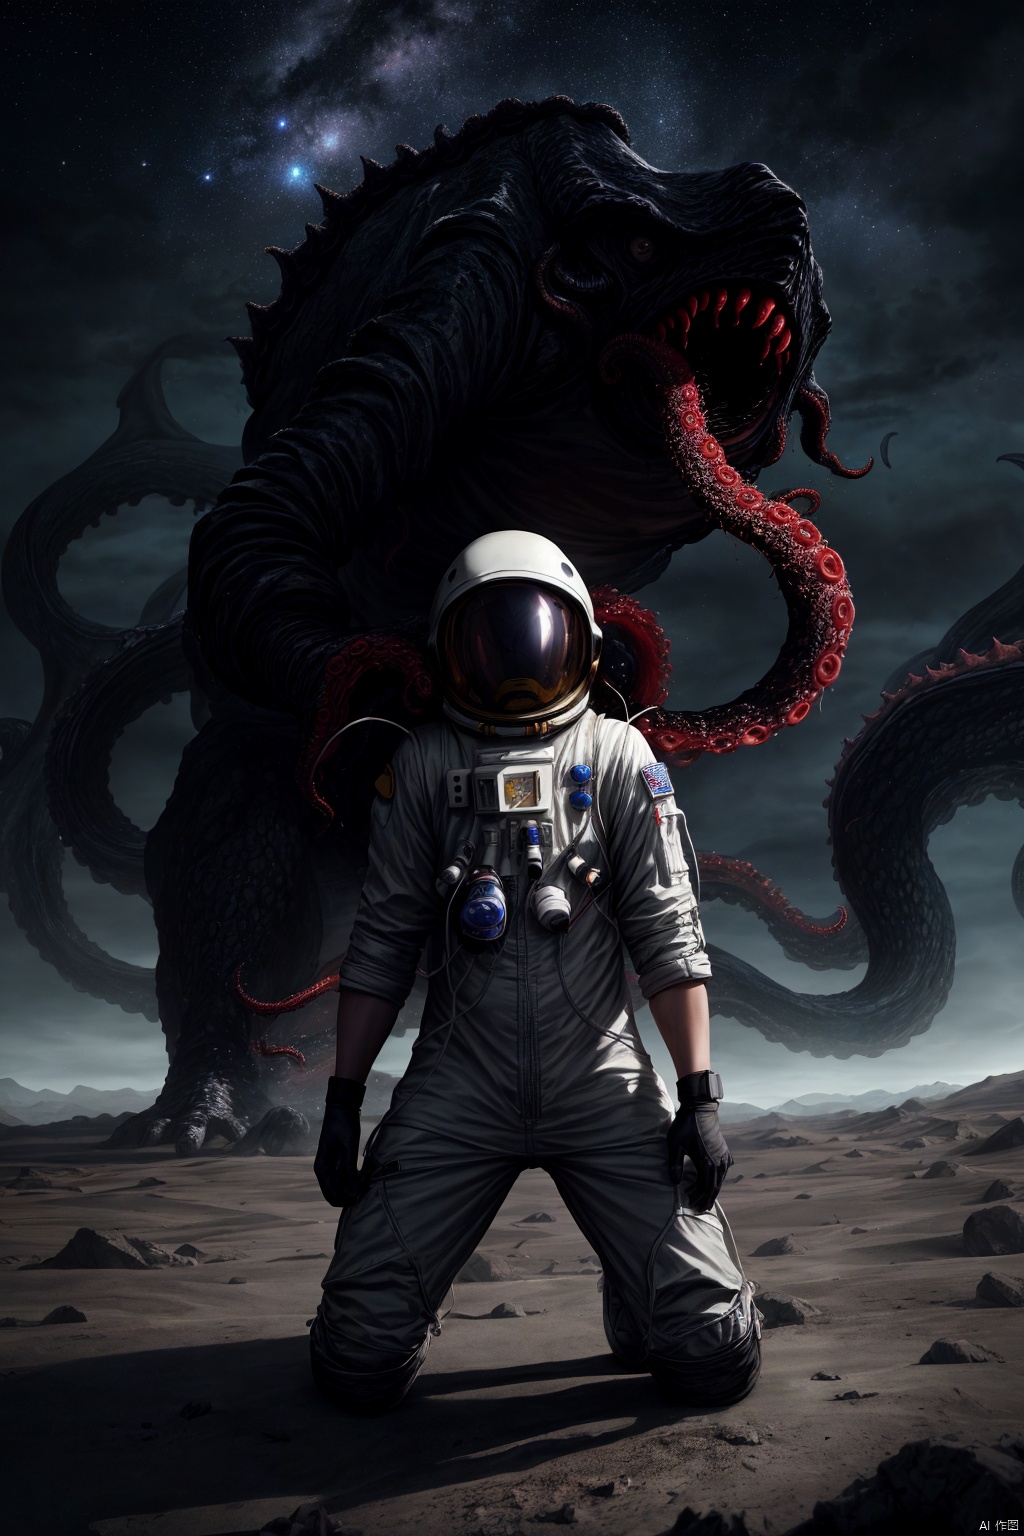 tiny astronaut,(despair:1.2),(kneeling:1.2),head_down,barren planet,confrontation,(gigantic Cthulhu-style monster:1.2),terrifying,space suit,helmet,rugged landscape,desolate,tense atmosphere,oxygen ****,gloves,boots,starry sky,distant galaxies,courage,determination,sci-fi setting,tentacled creature,ominous,mythical,otherworldly,incredibly absurdres,wallpaper,realistic,real,photo,landscape,foreshortening,beautiful detailed eyes,Fine hair texture,masterpiece,best quality,highly detailed,Amazing,finely detail,extremely detailed CG unity 8k wallpaper,score:>=60, BY MOONCRYPTOWOW